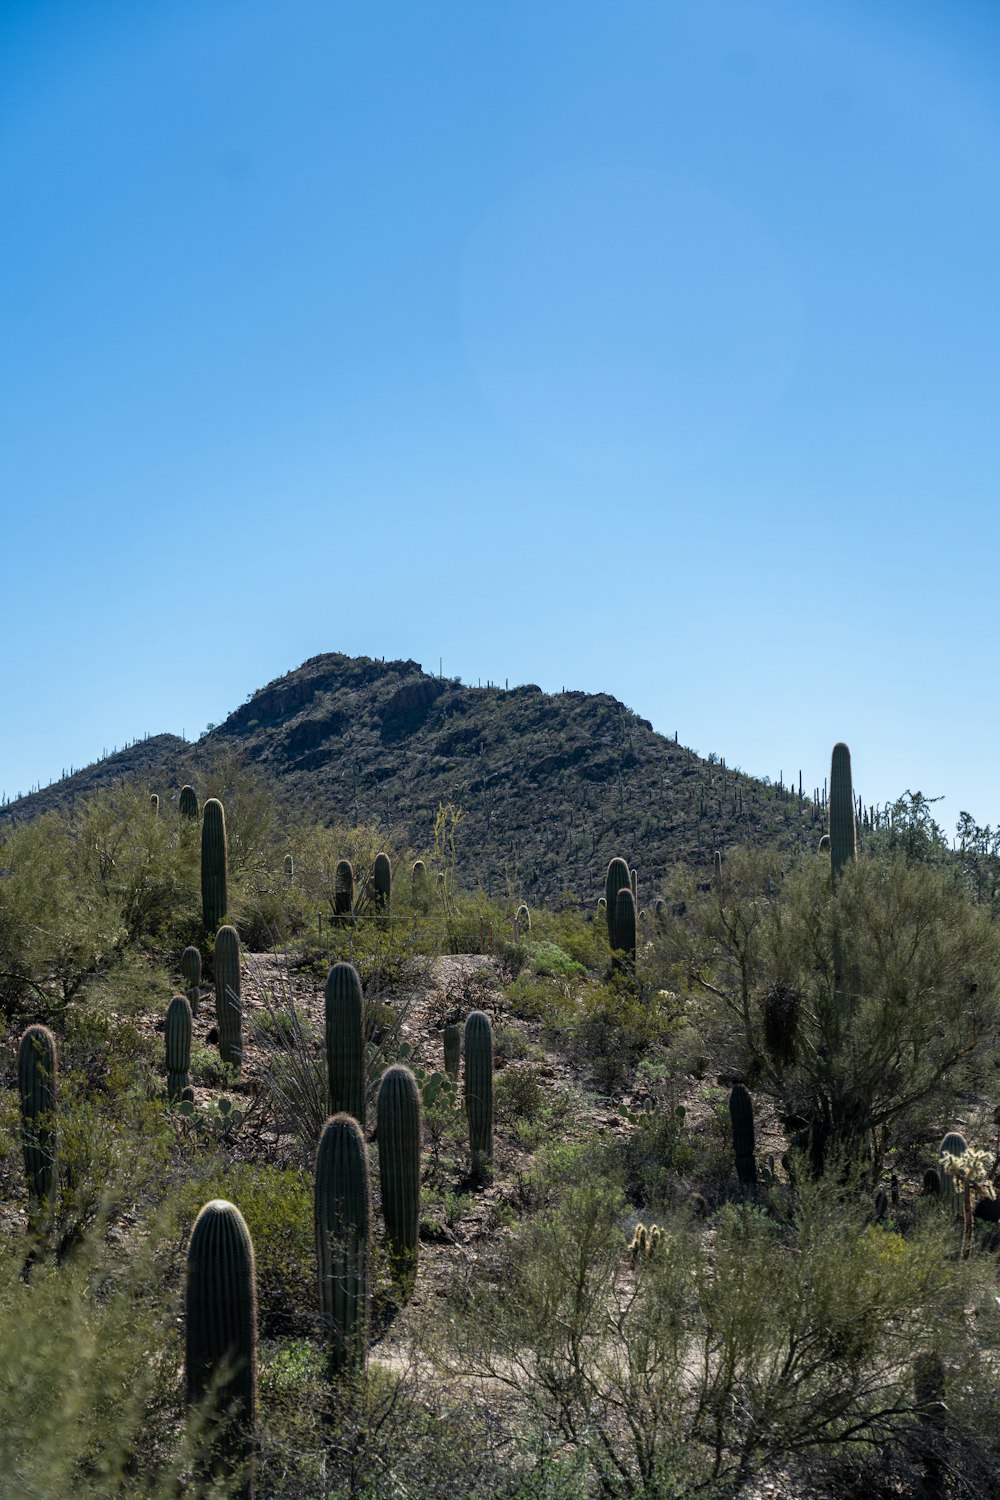 a large hill with a bunch of cactus in the foreground